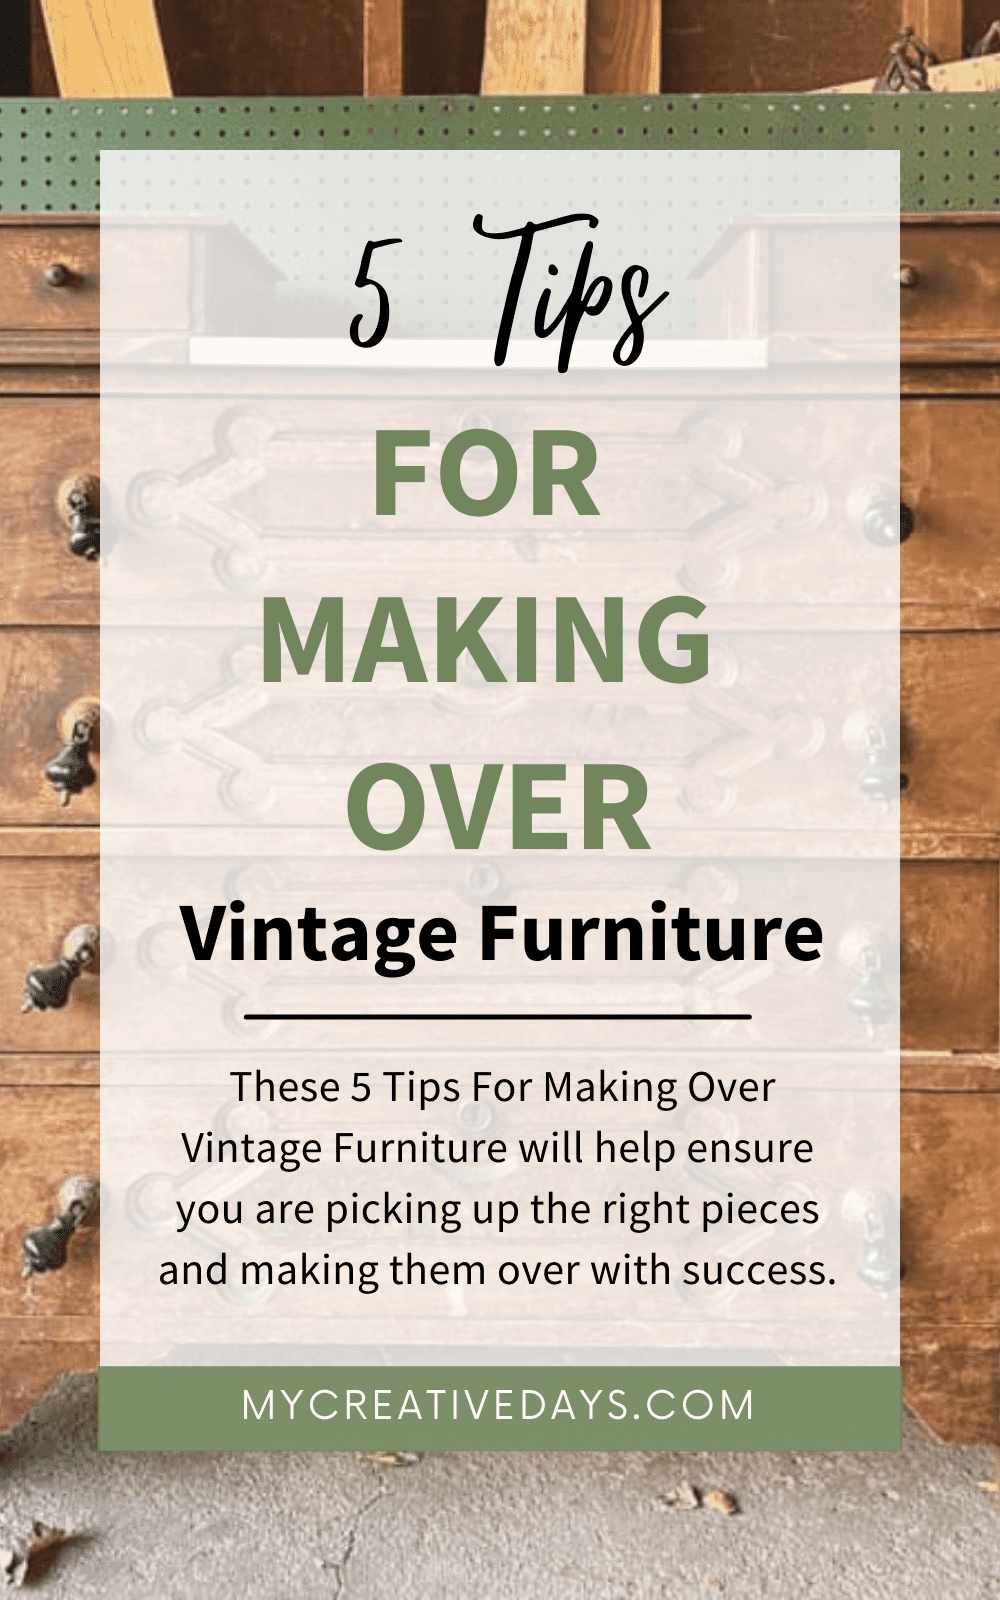 These 5 Tips For Making Over Vintage Furniture will help ensure you are picking up the right pieces and making them over with success.